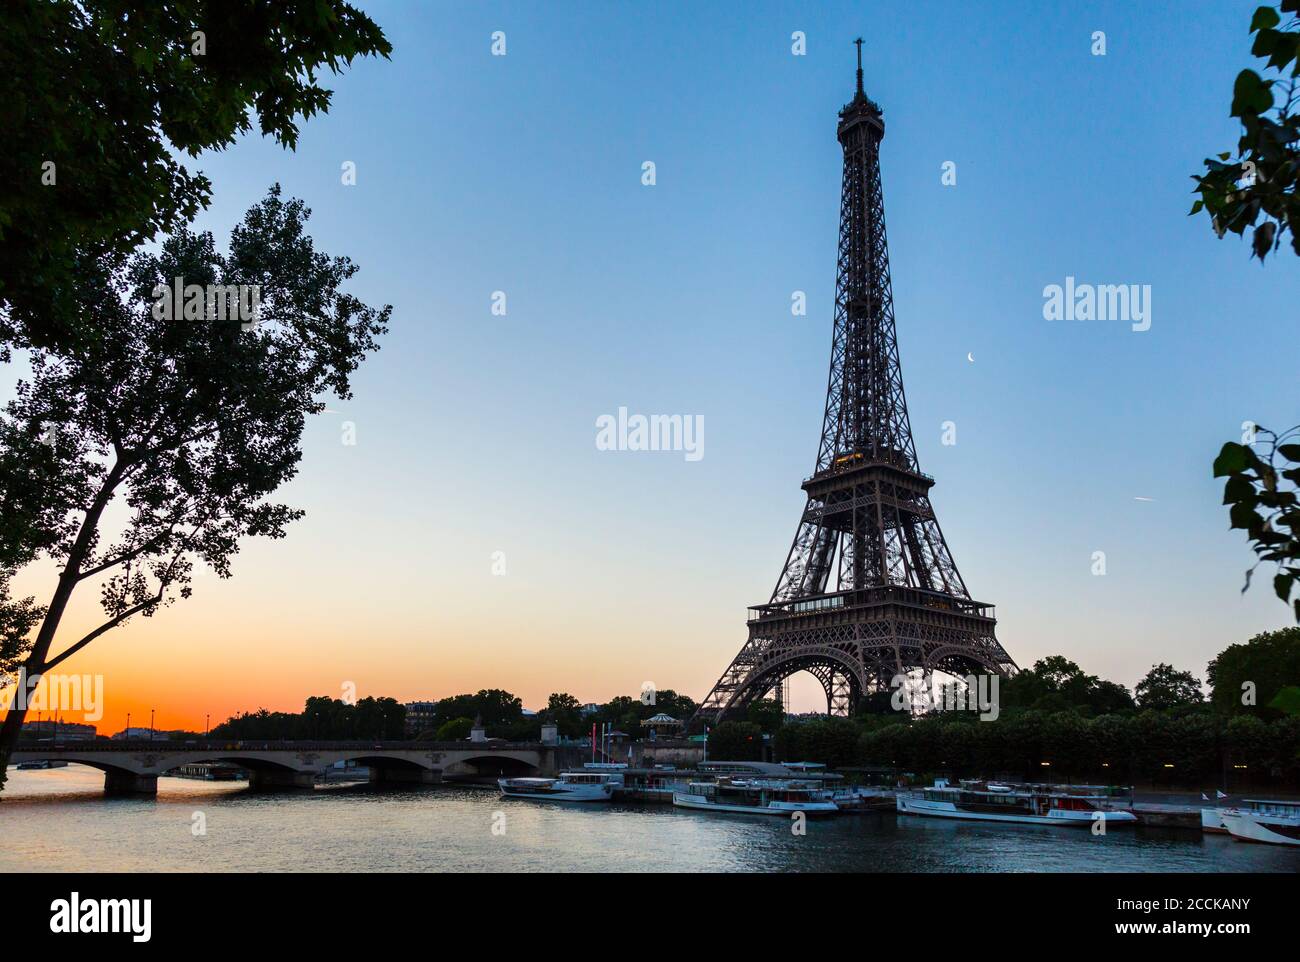 Eiffel Tower by seine river against clear sky at sunset, Paris, France Stock Photo